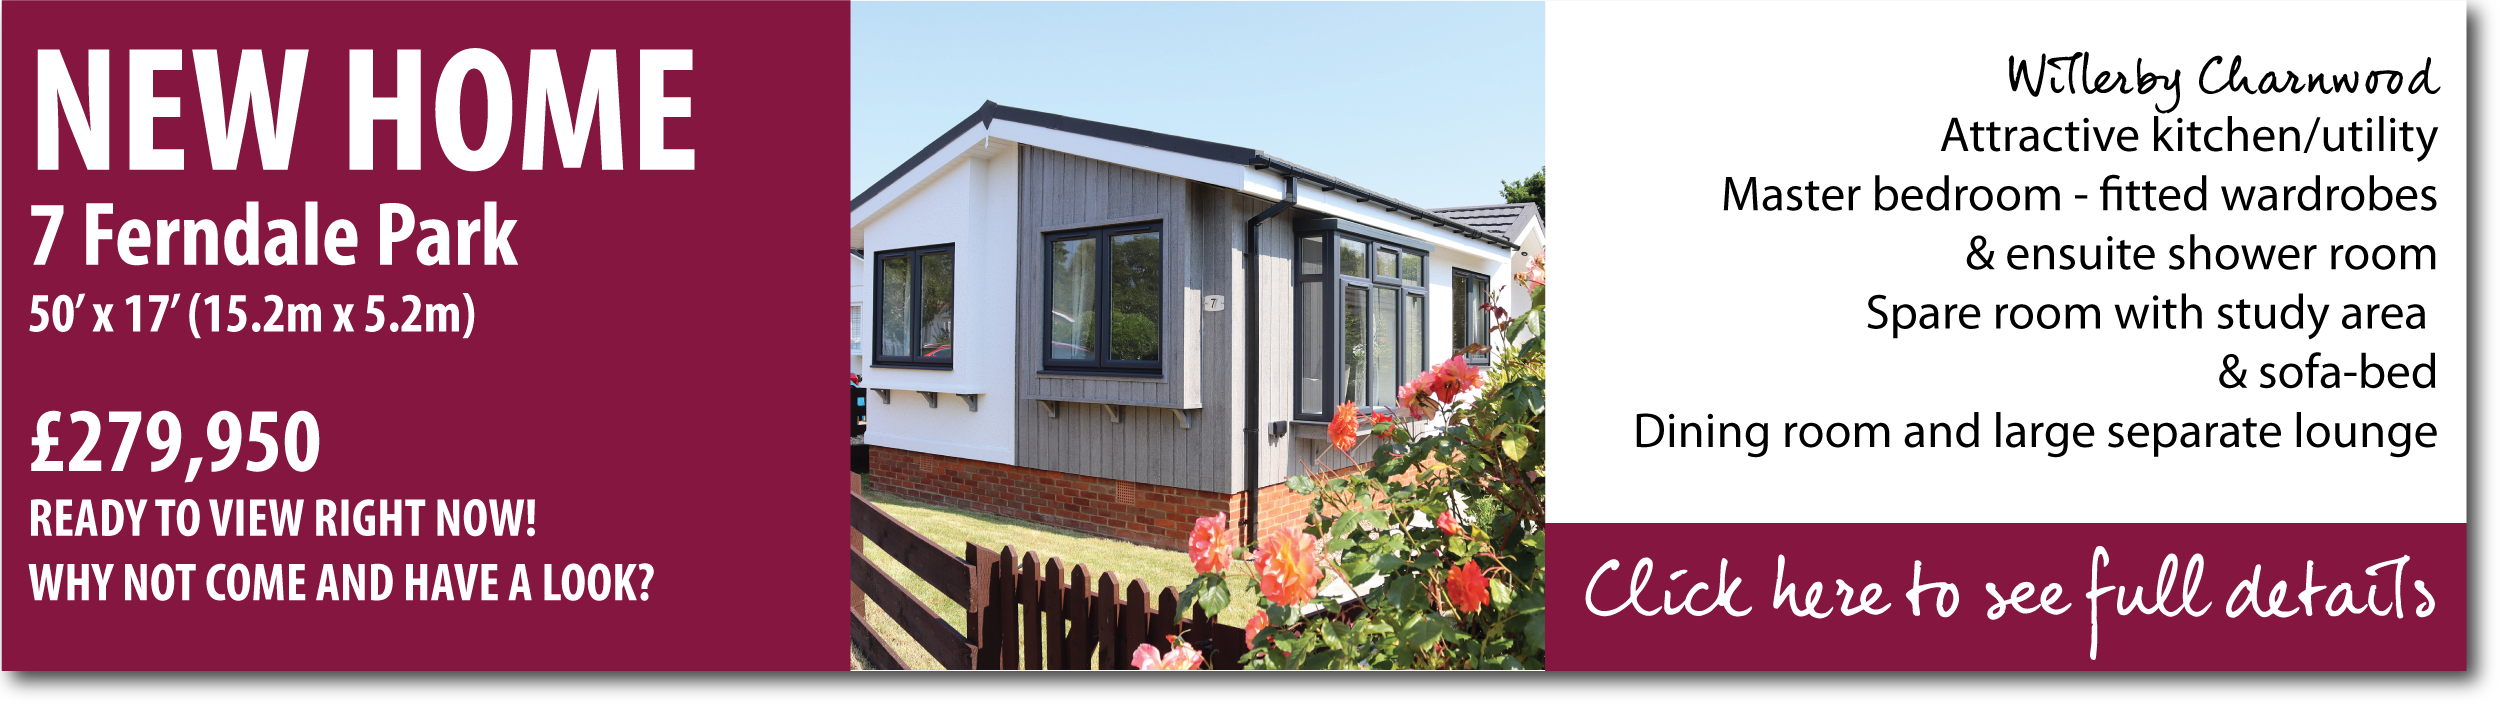 New home for sale Ferndale Park Bray Windsor. Click to find out more.